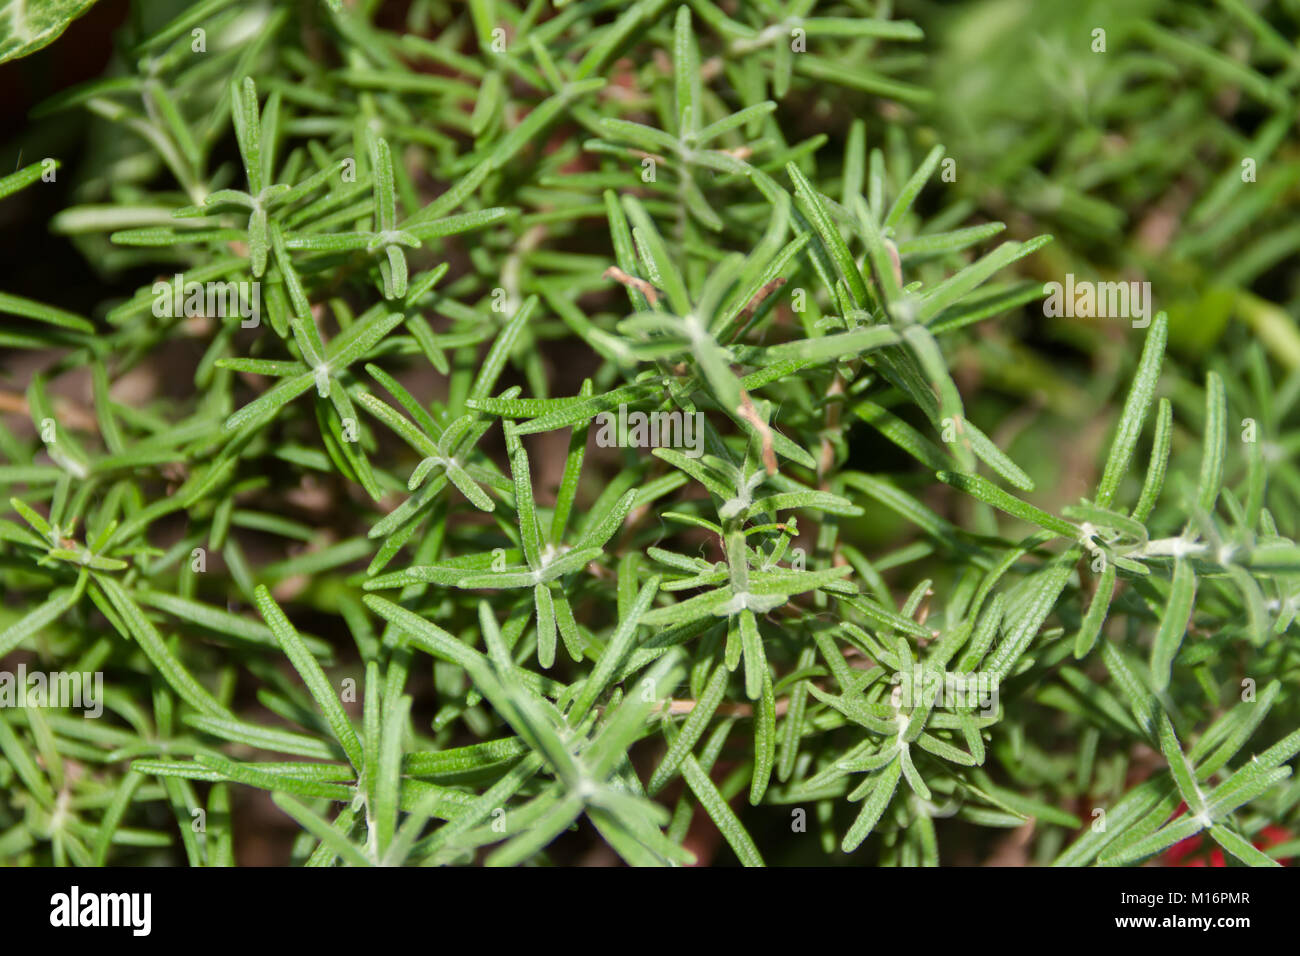 green leaves of aromatic and medicinal rosemary from the organic garden Stock Photo